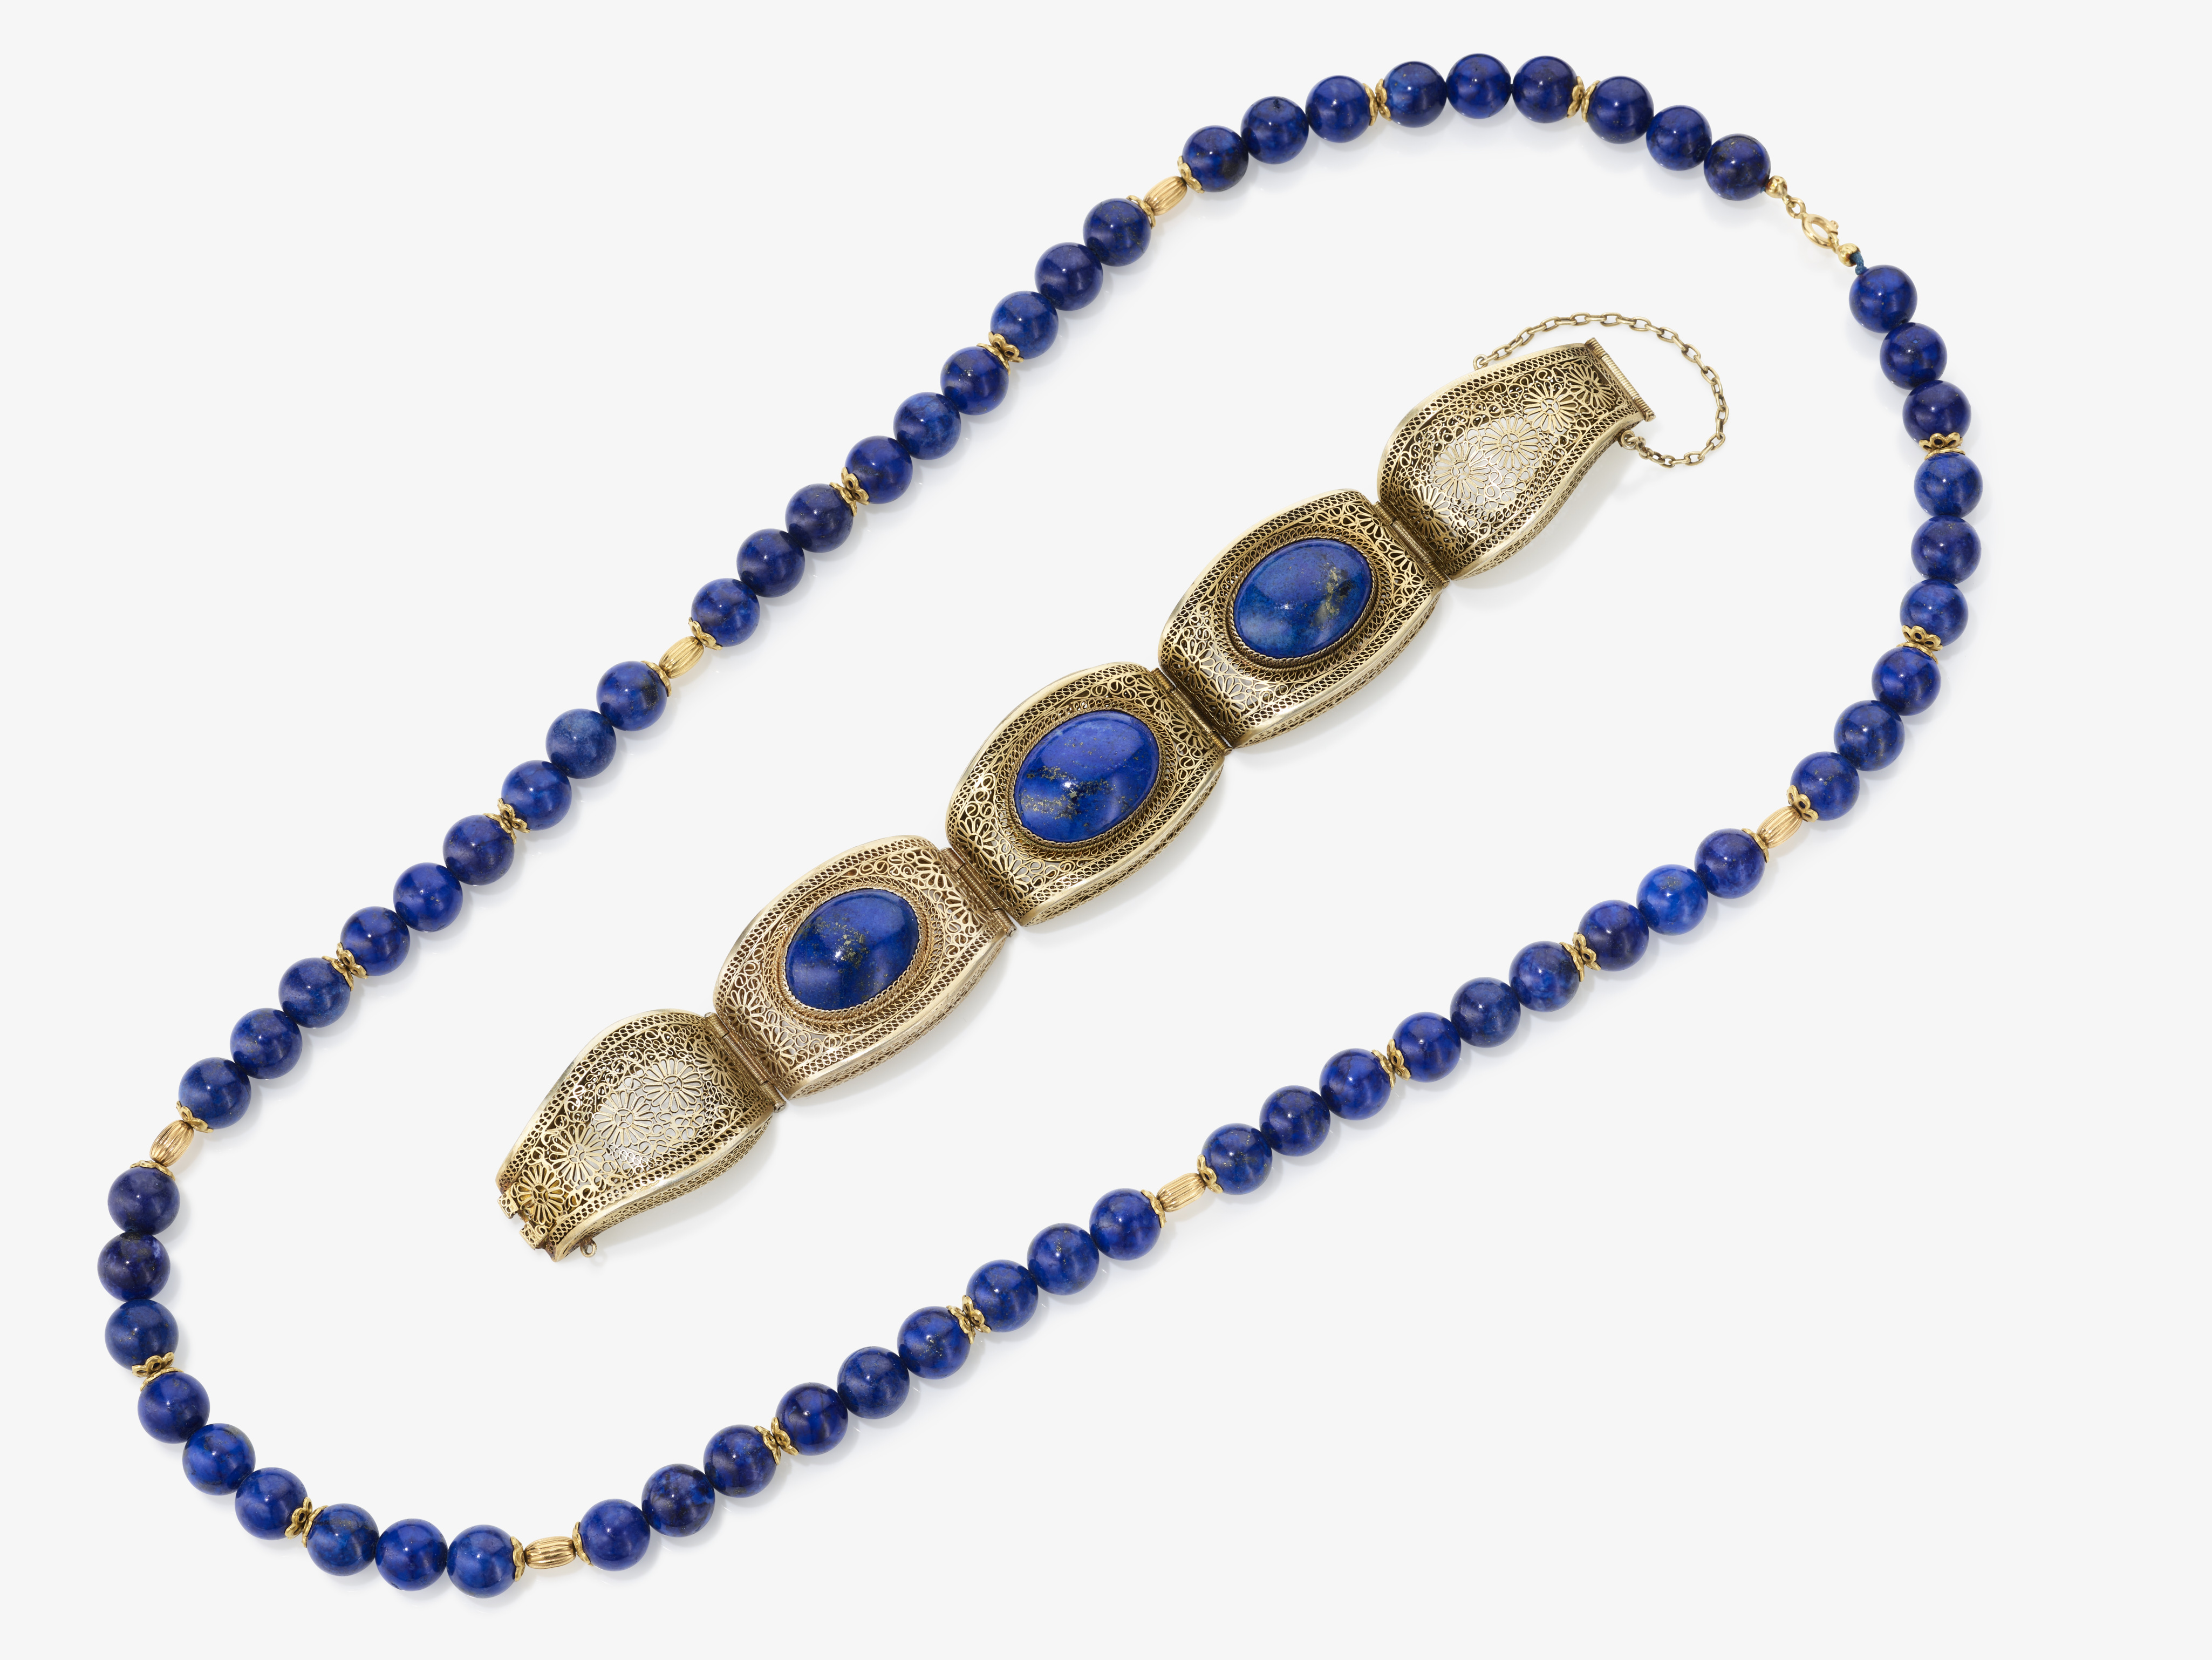 A necklace and bracelet with lapis lazuli - Bracelet: China, early 20th ...